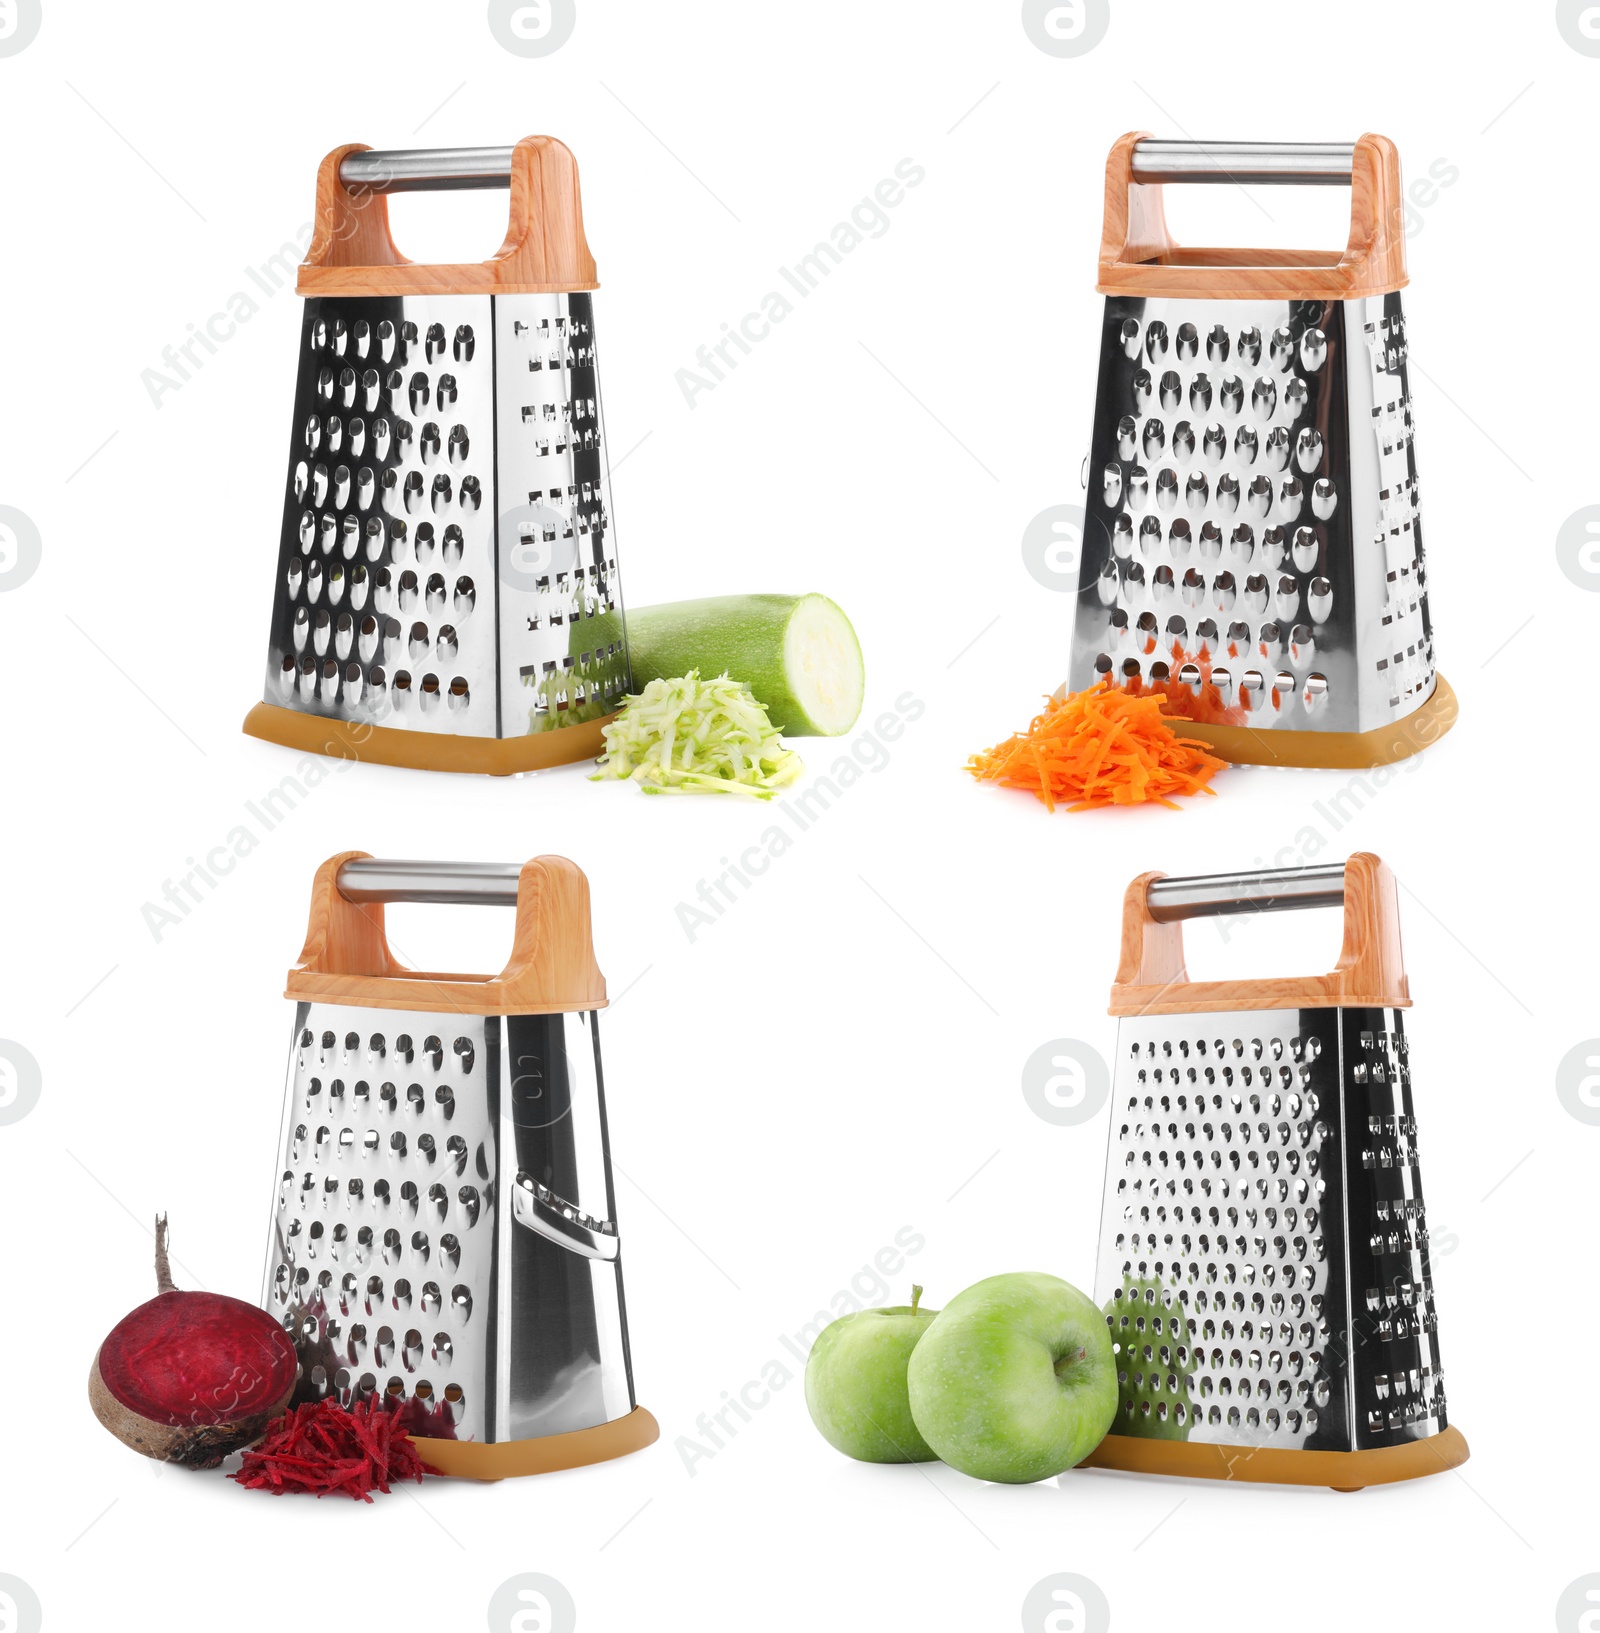 Image of Set with stainless steel graters and fresh products on white background